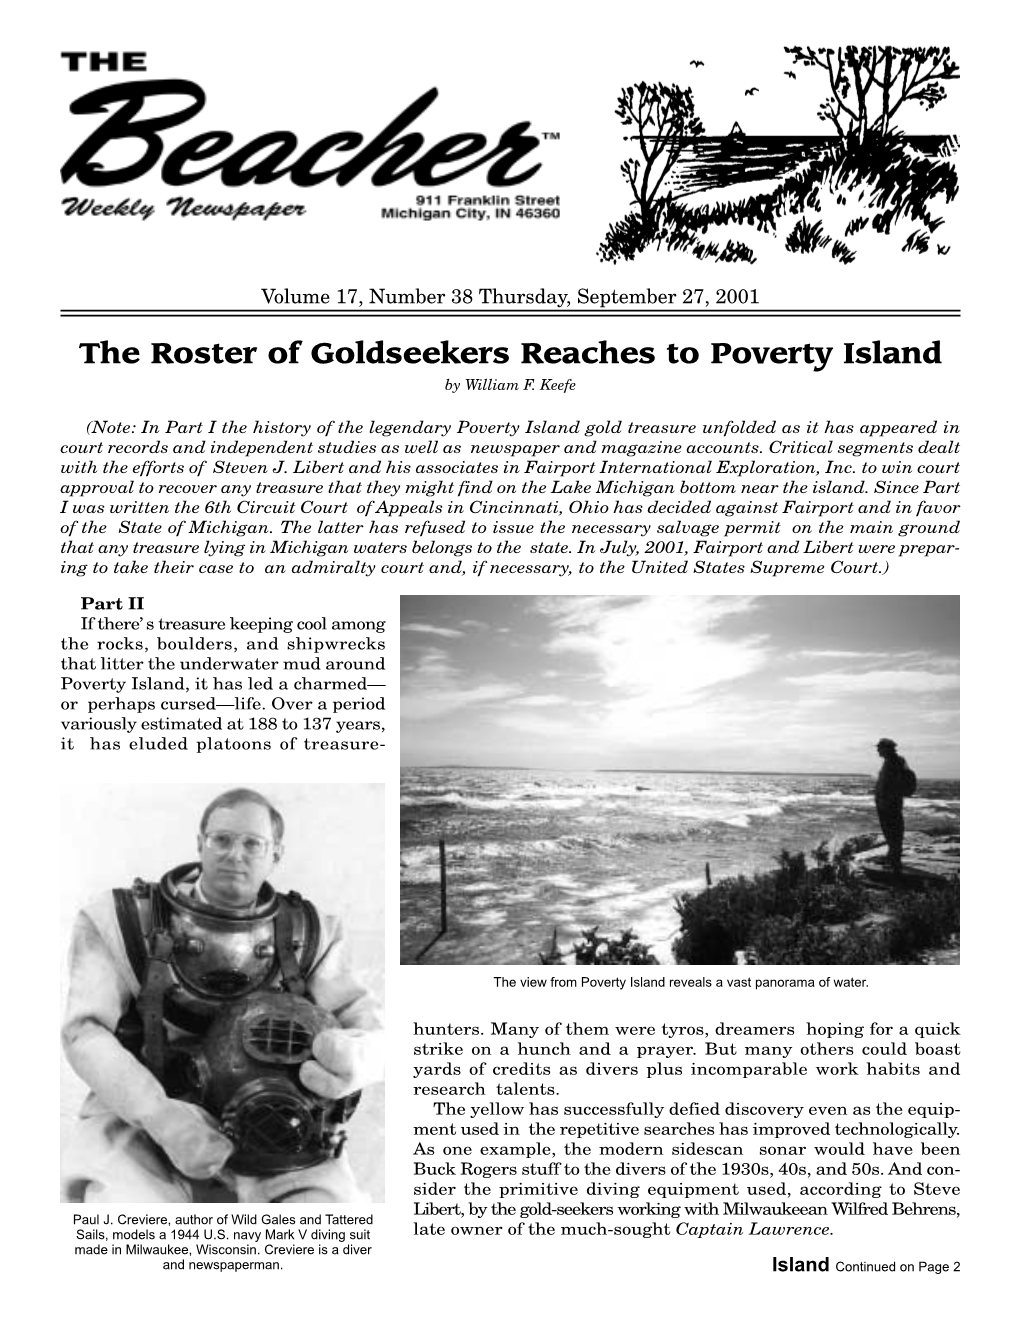 The Roster of Goldseekers Reaches to Poverty Island by William F